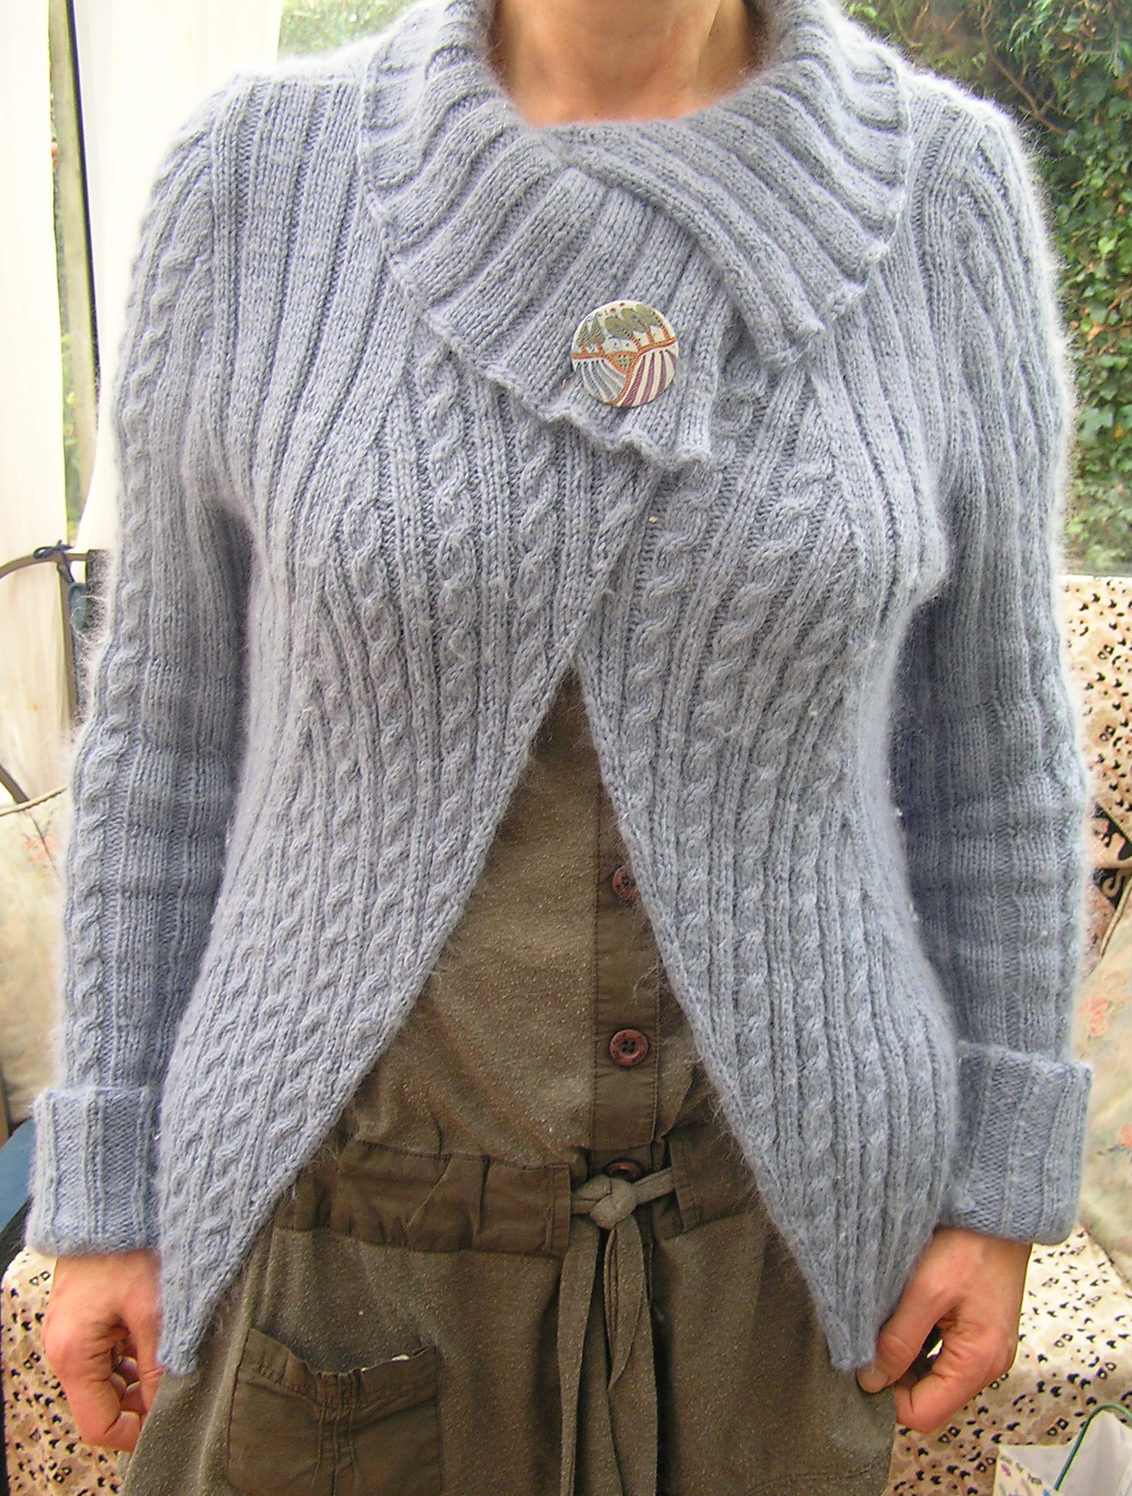 Free Knitting Pattern for Twist and Shout Cardigan